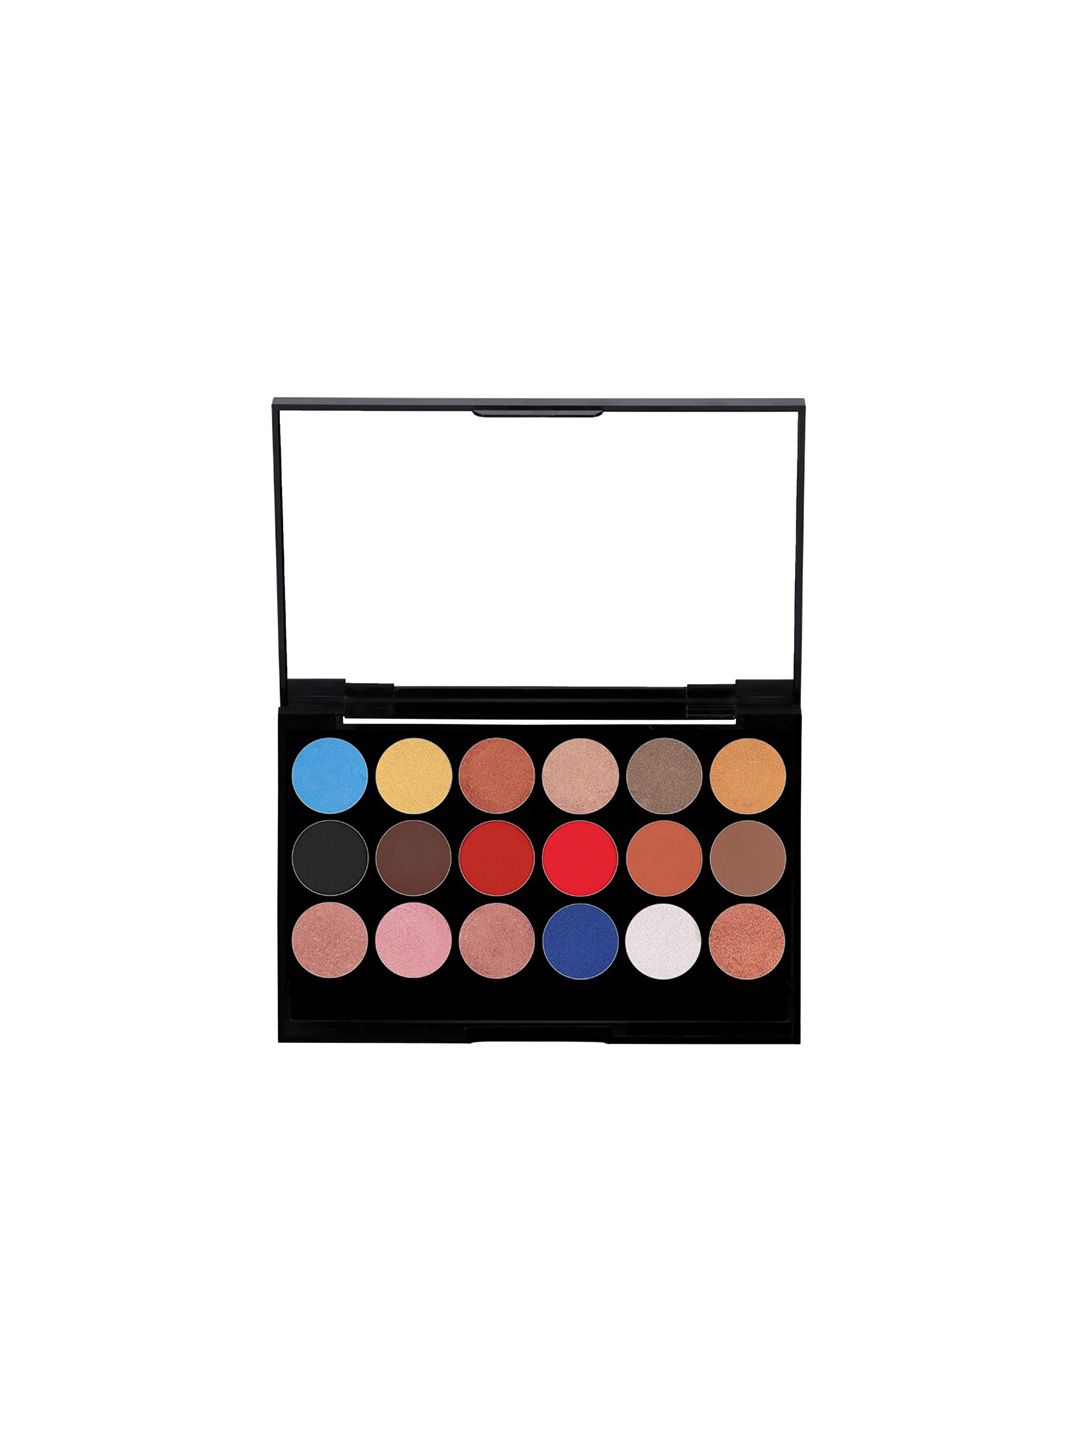 C2P PROFESSIONAL MAKEUP Metal & Matte Edition Eyeshadow Palette Price in India